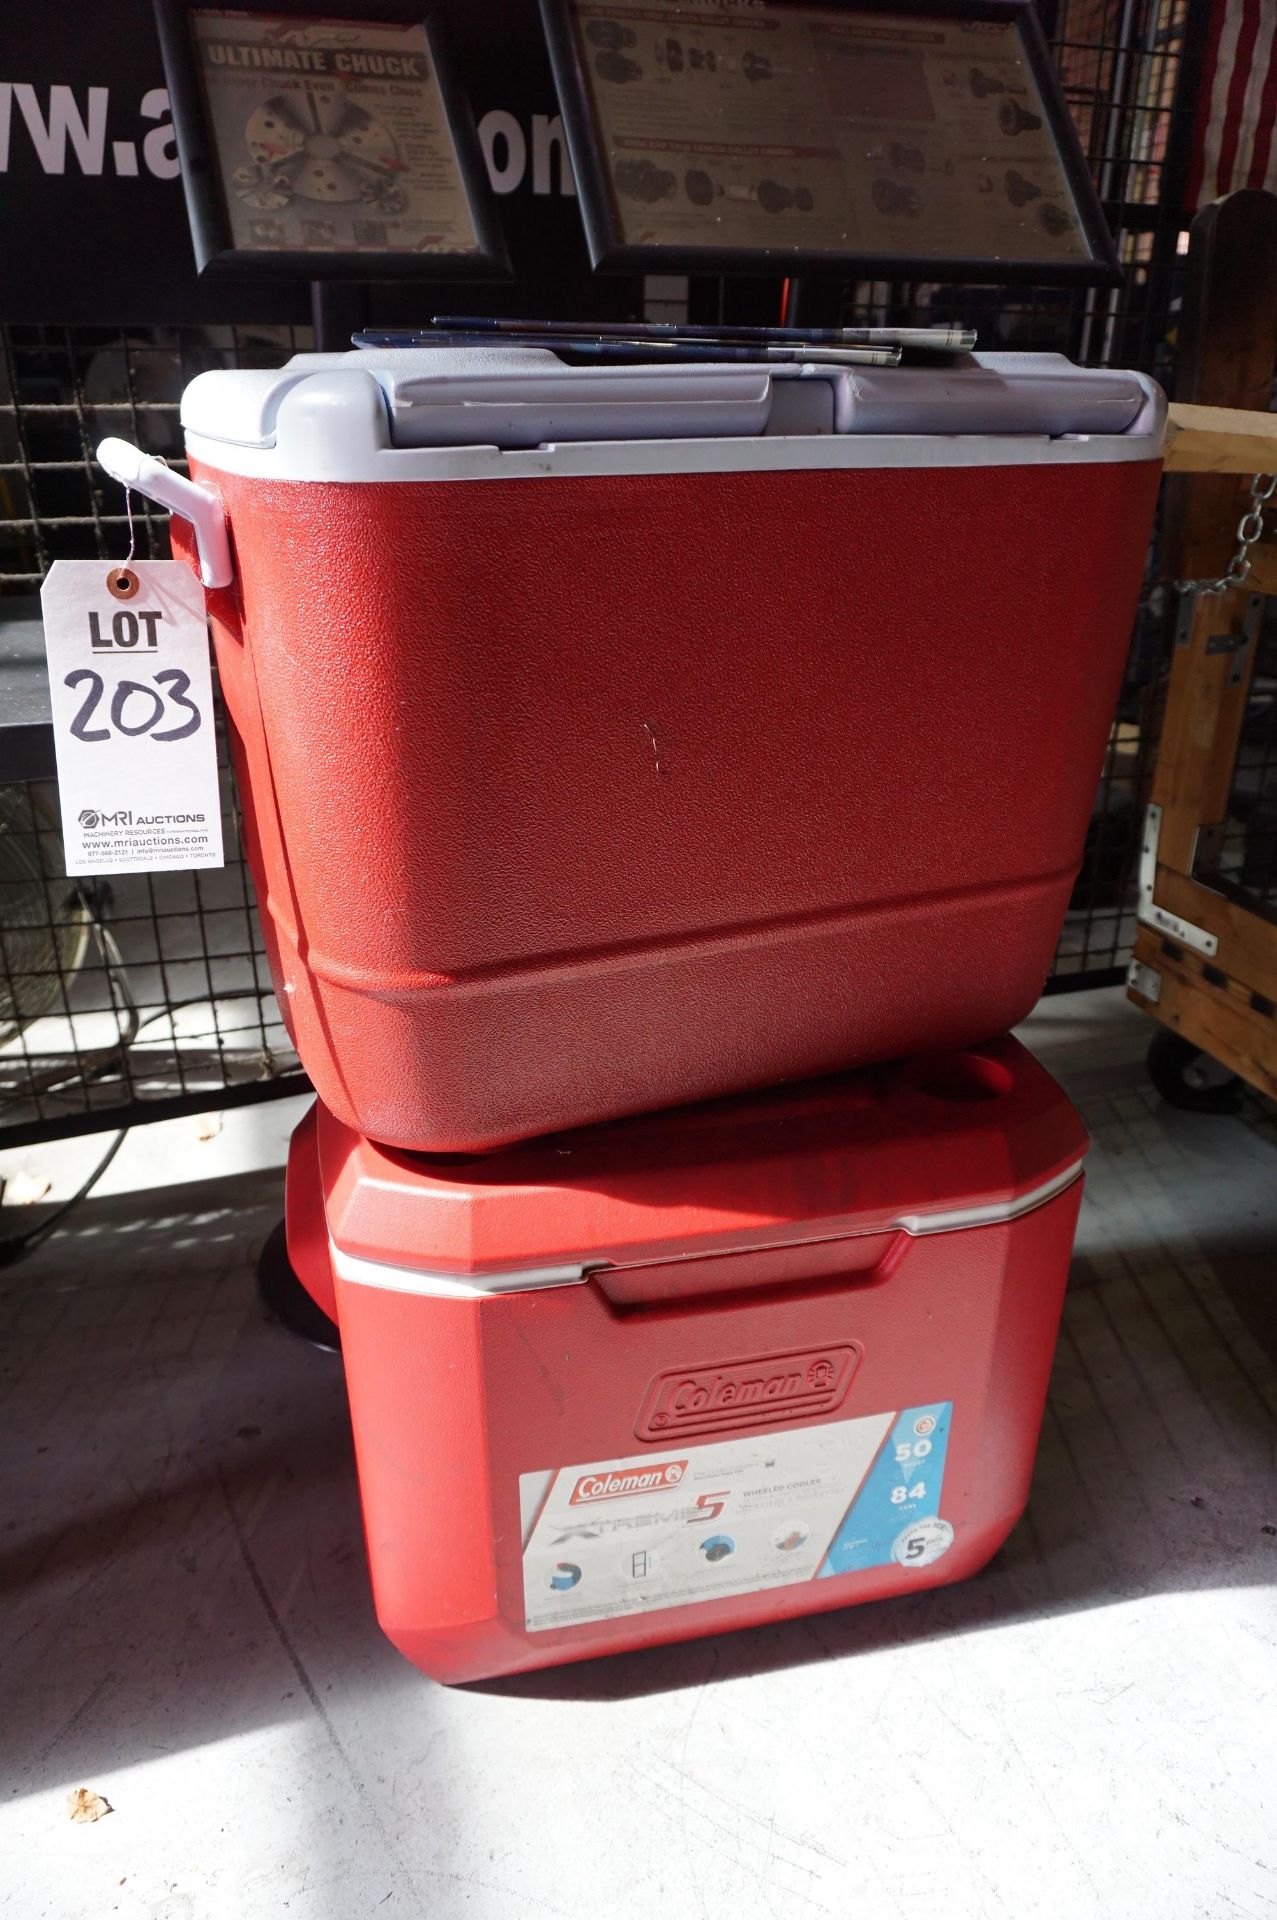 SUMMER SPECIAL: (2) COOLERS, (1) PROPANE CHARBROIL GRILL, (1) GARAGE BEER REFRIGERATOR